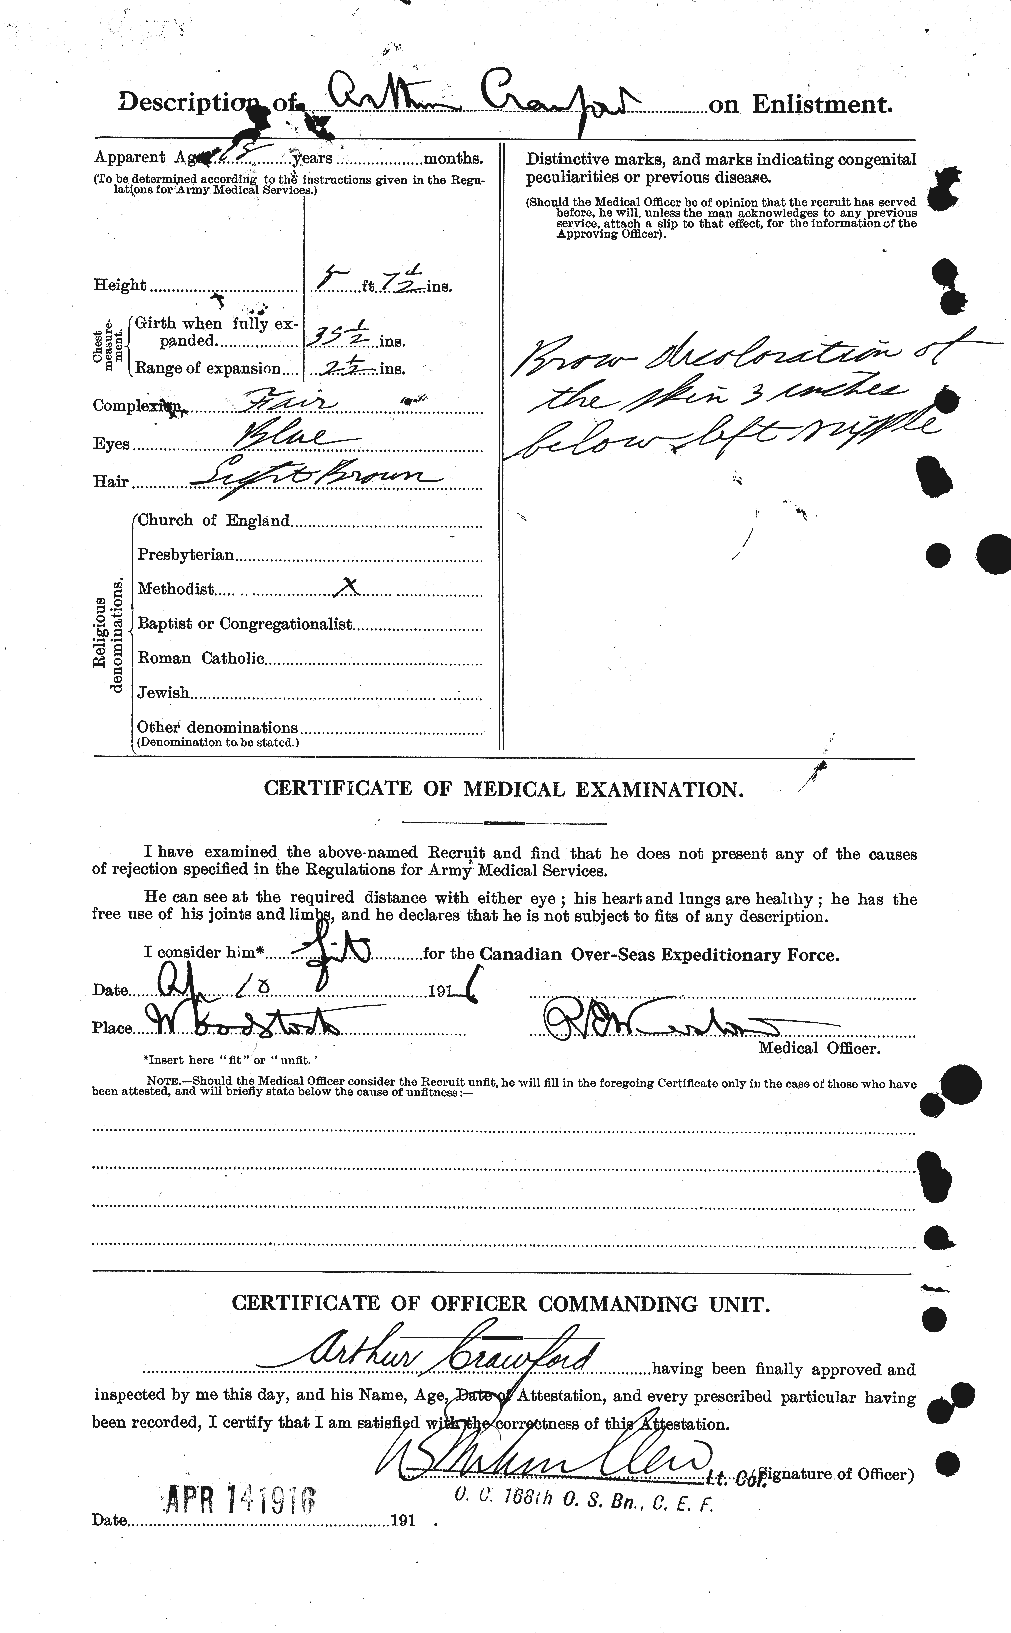 Personnel Records of the First World War - CEF 060930b